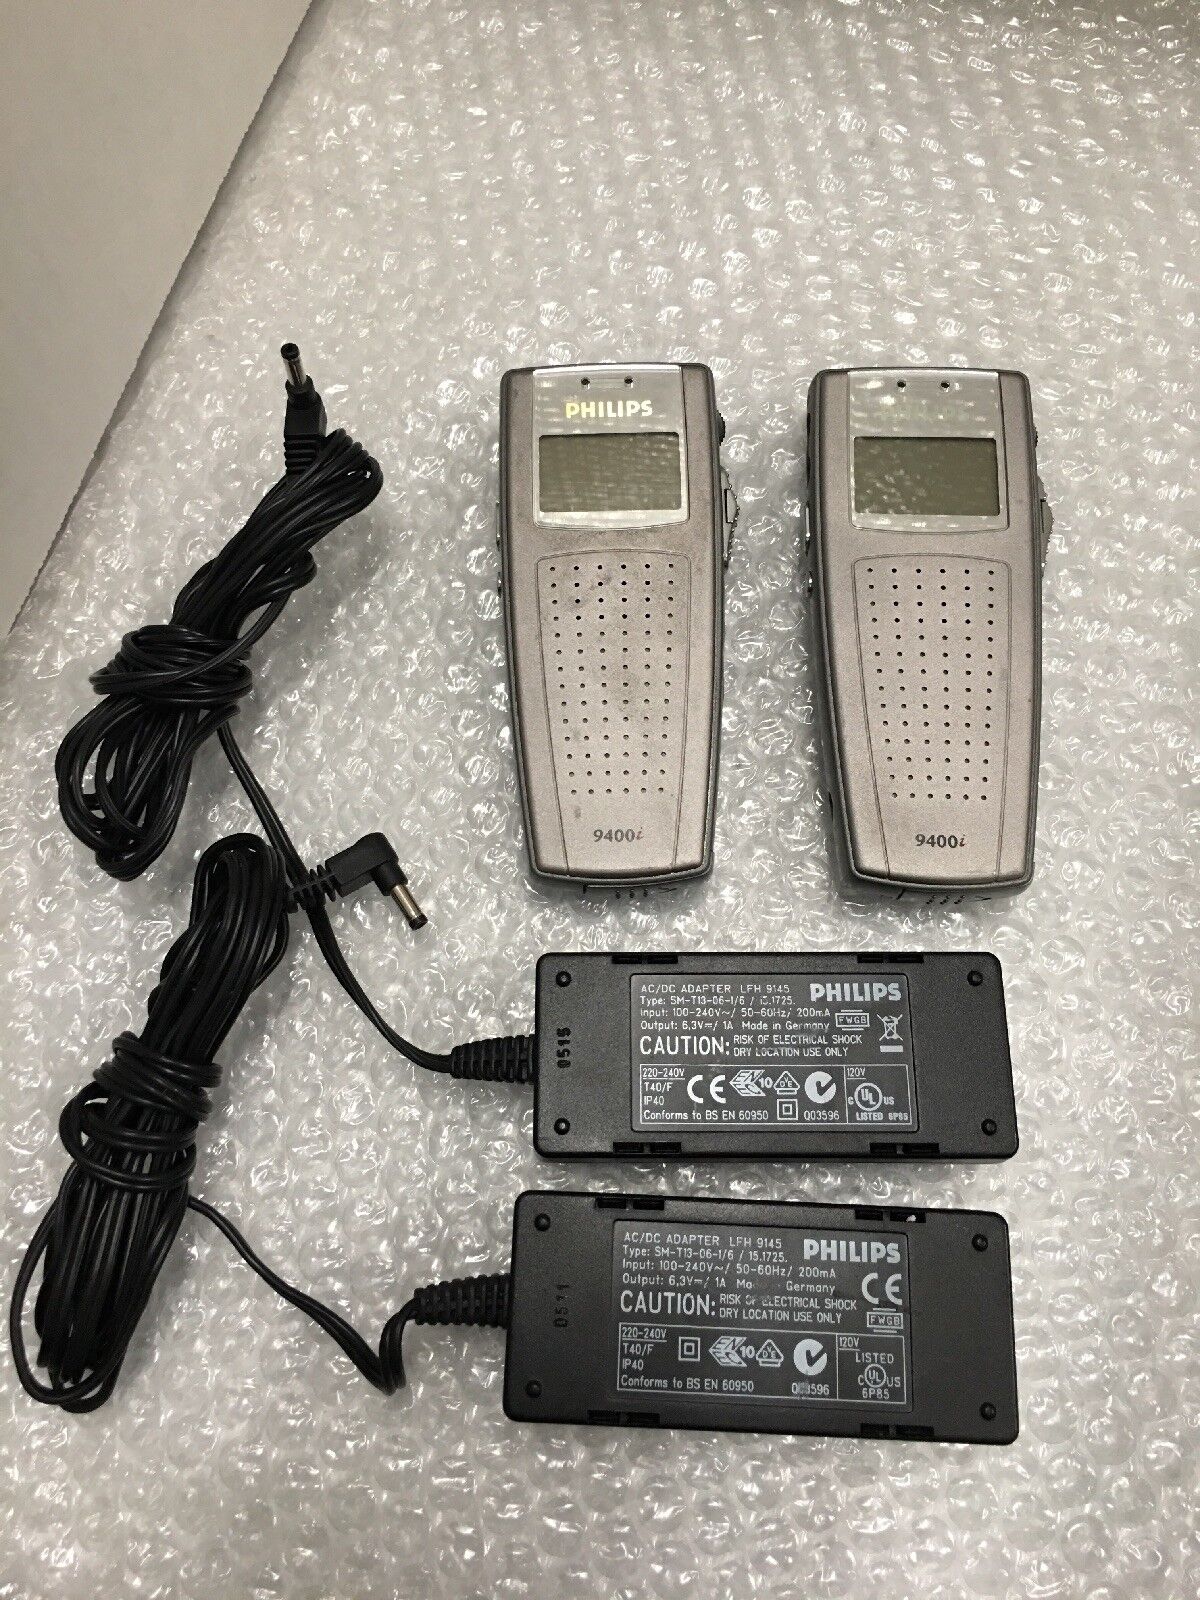 - 2x  Philips LFH9400 Digital Dictation Recorder with power supply @@@